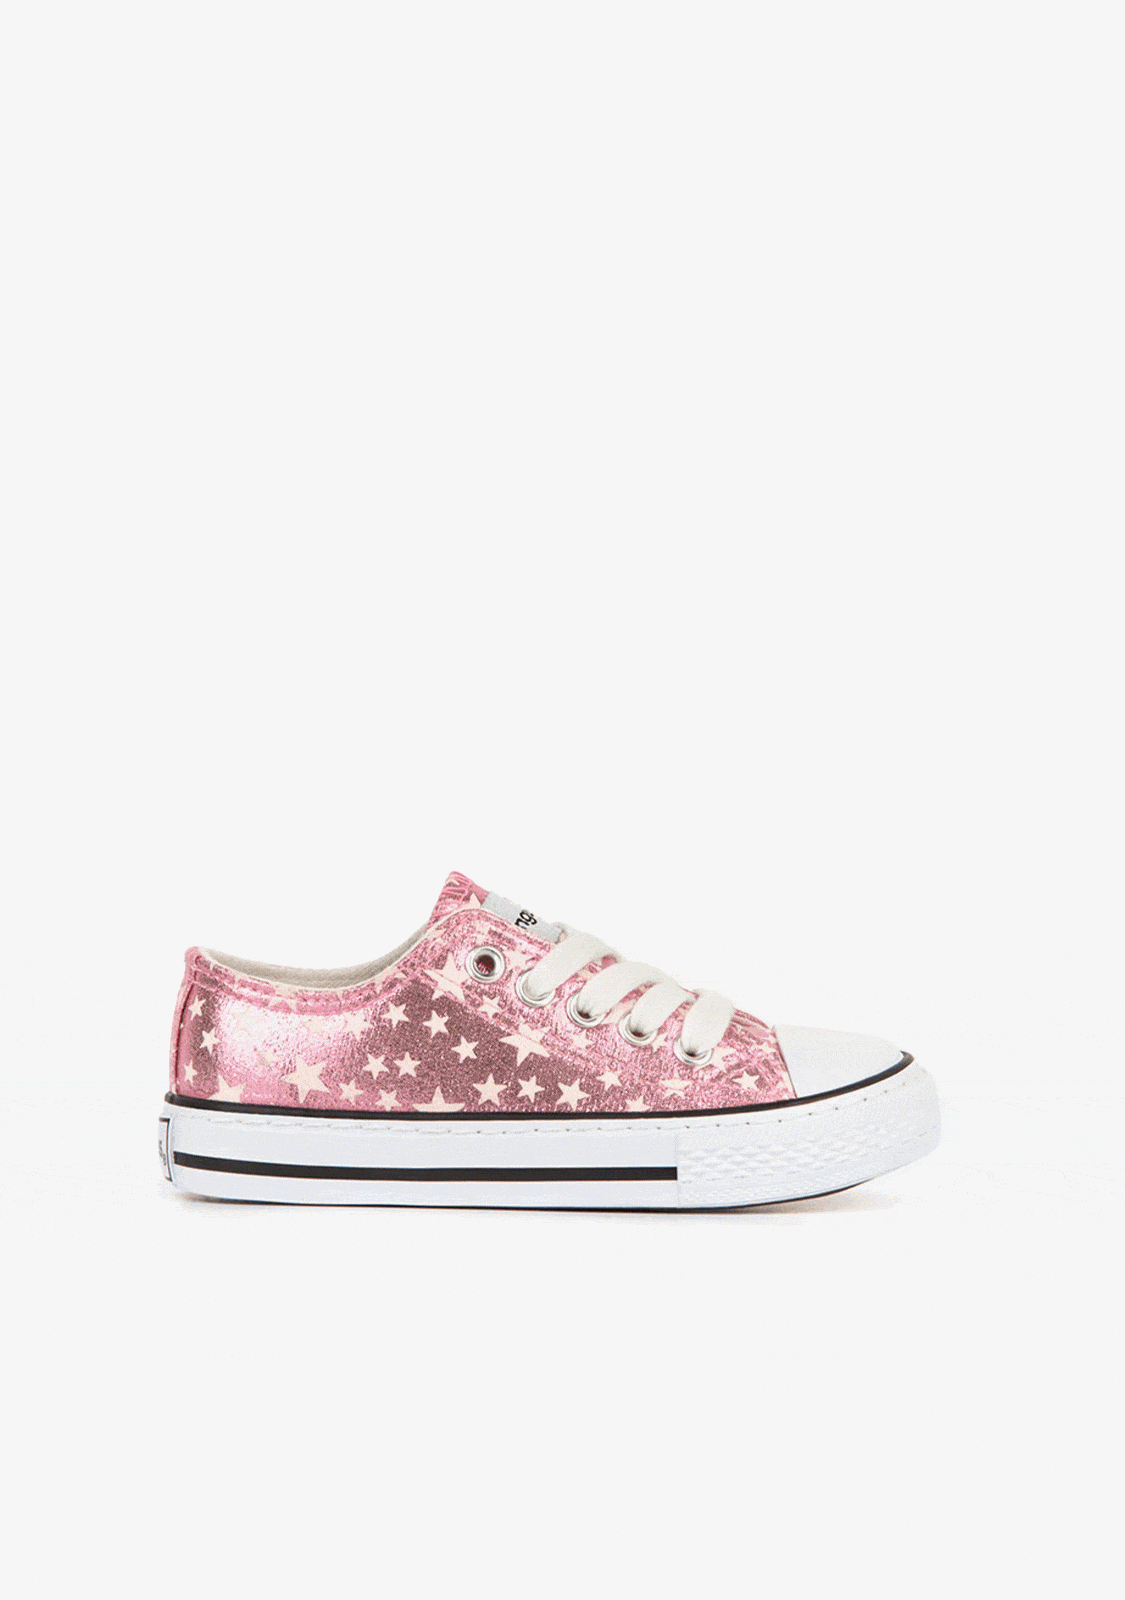 CONGUITOS Shoes Girl's Pink Stars Sneakers